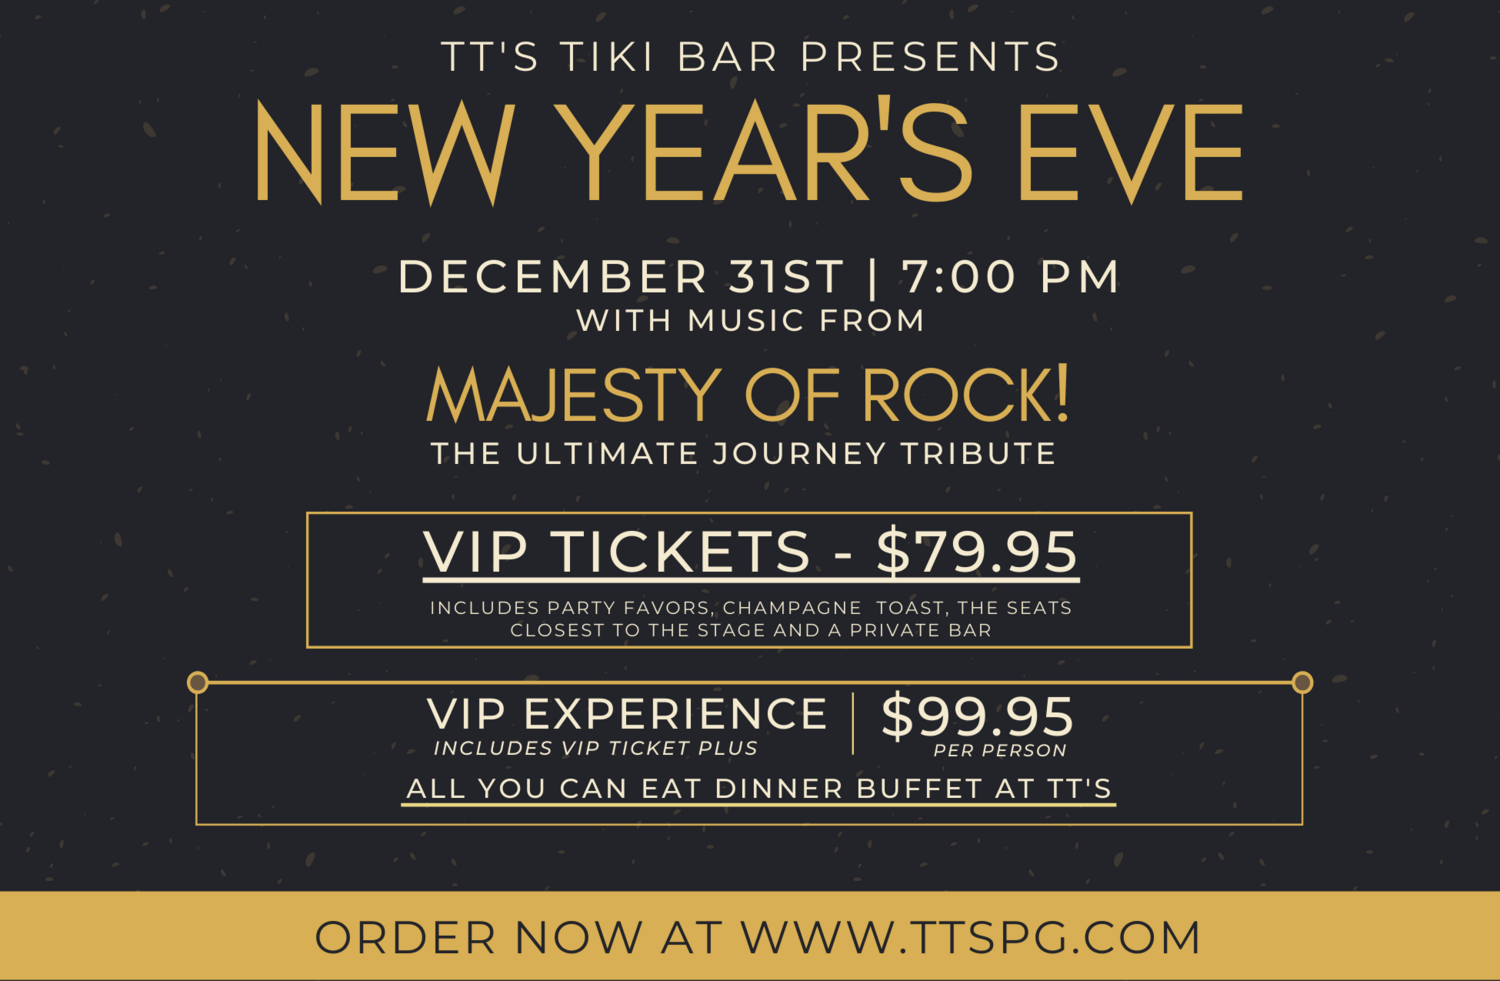 New Year's Eve with Majesty of Rock! (December 31st)